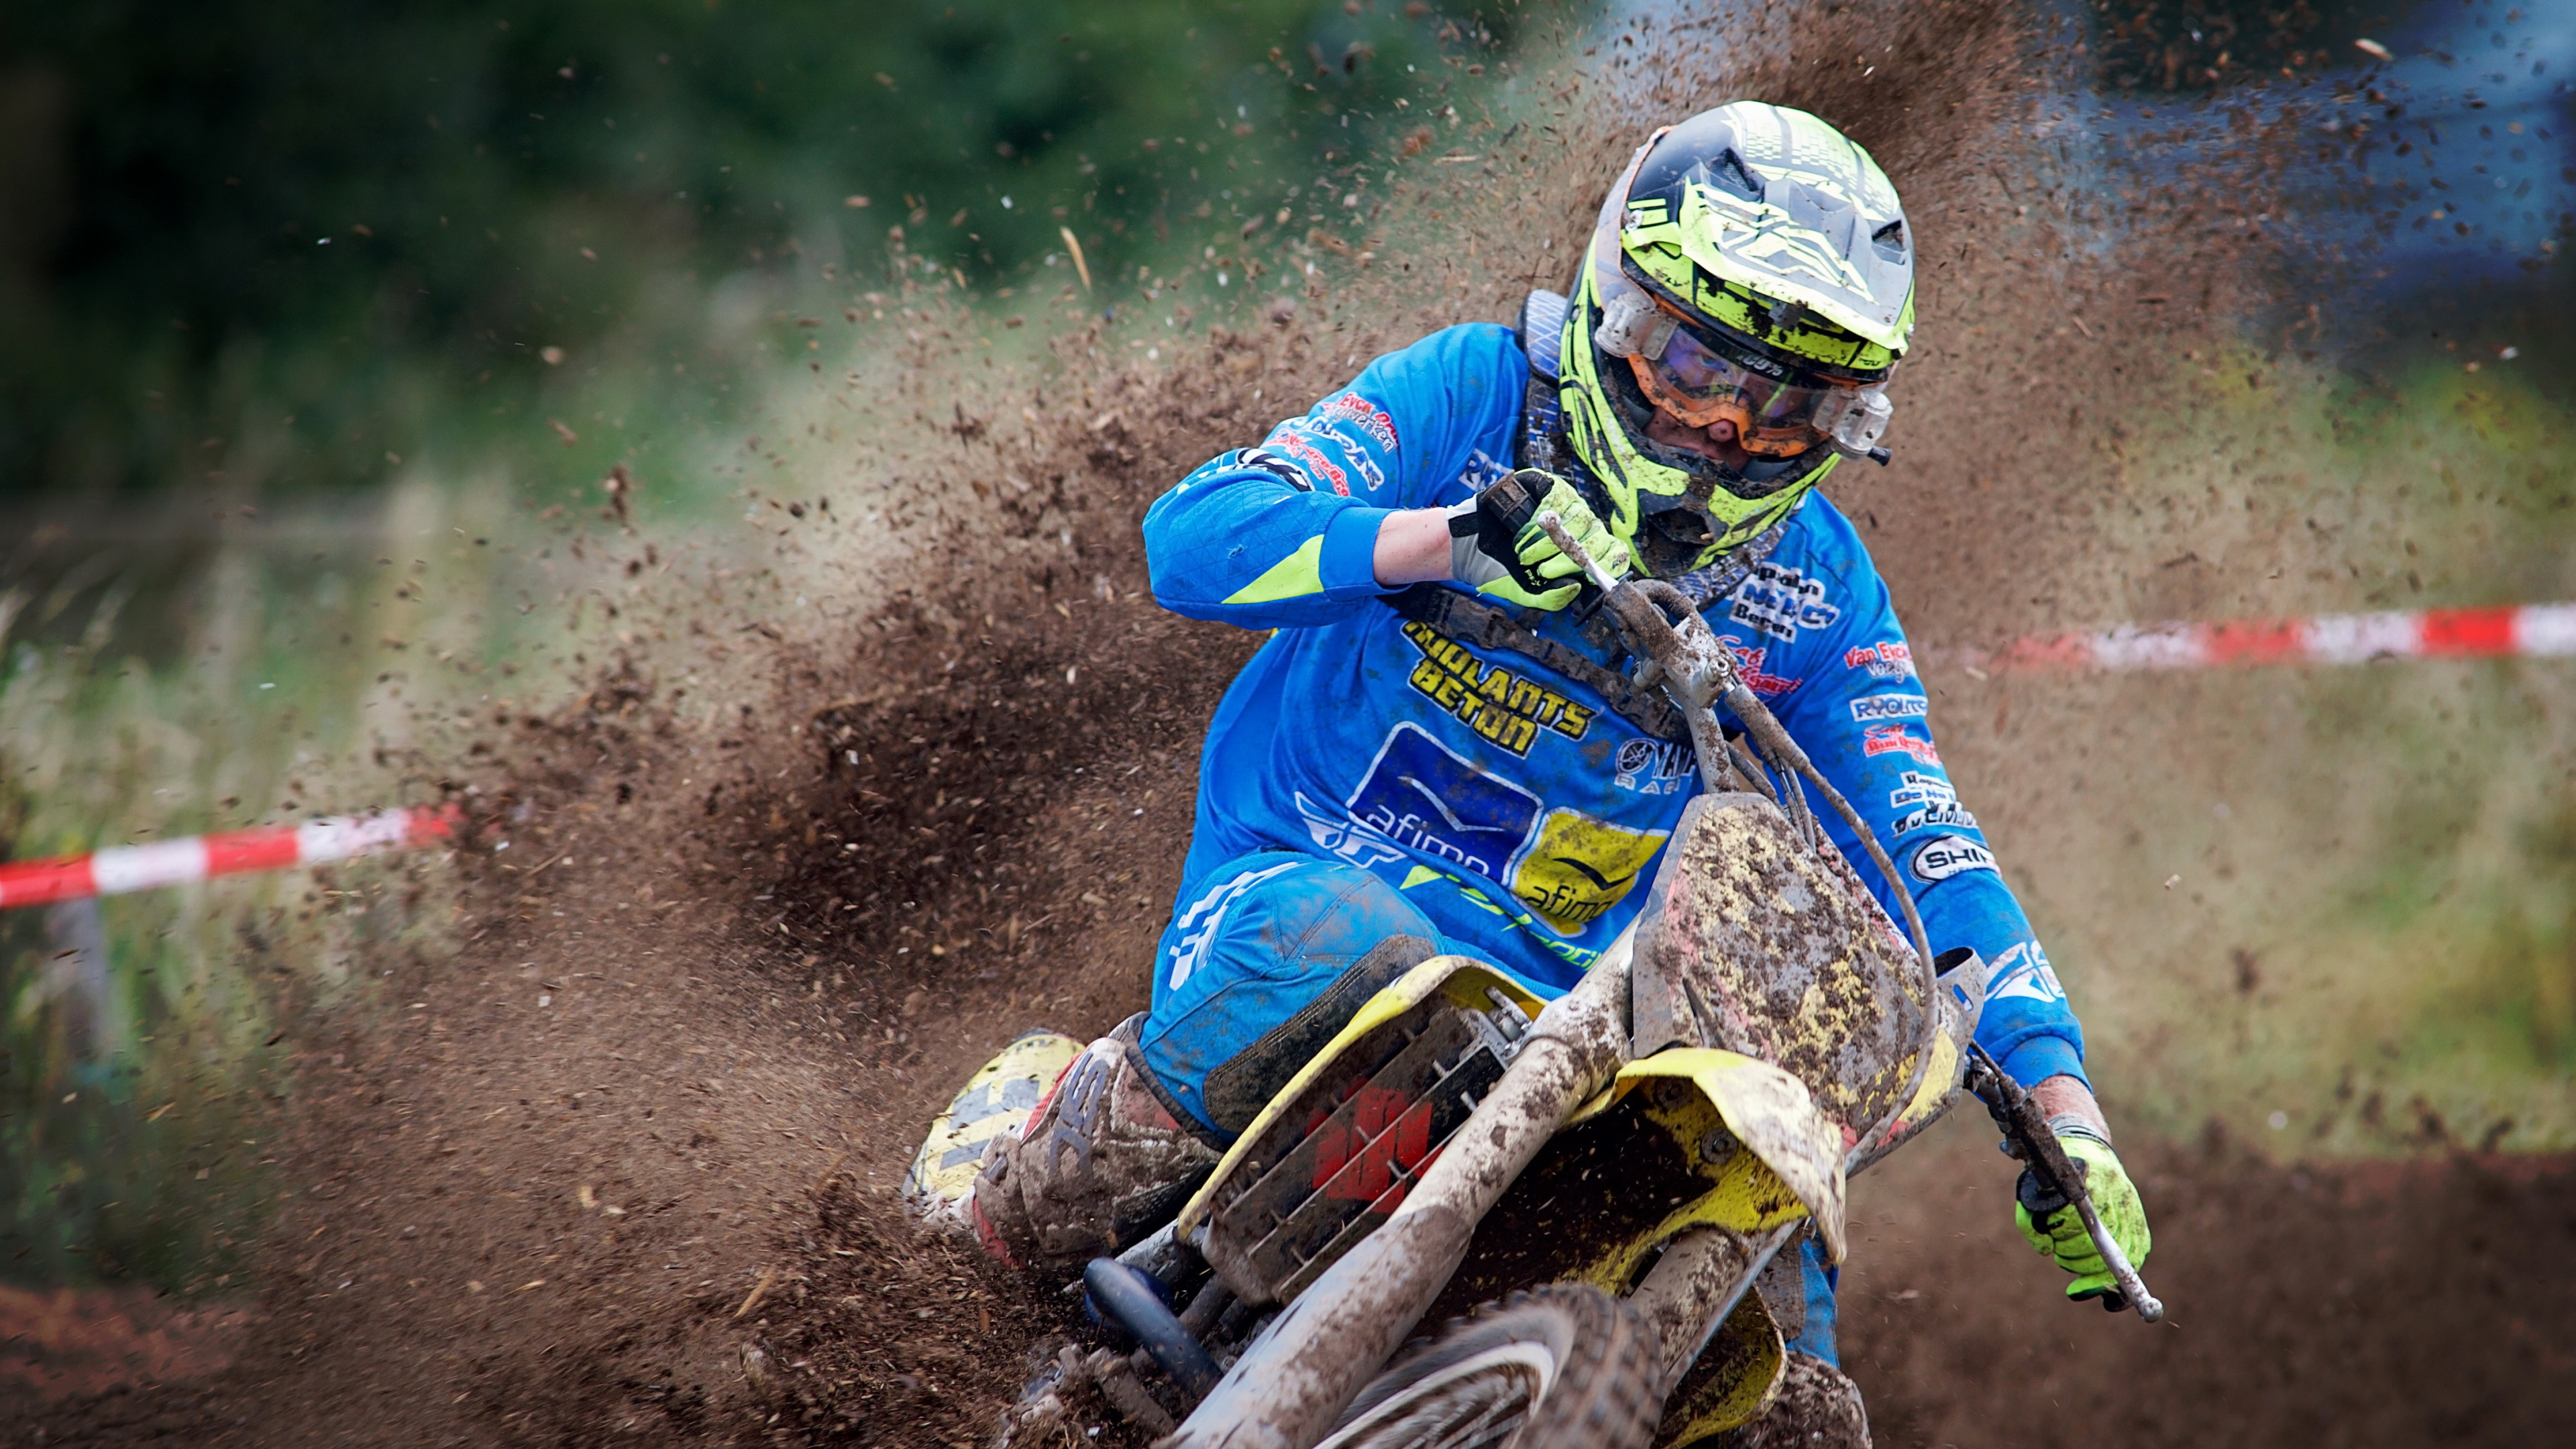 Man in Blue and Red Jacket Riding on Motocross Dirt Bike. Wallpaper in 3840x2160 Resolution